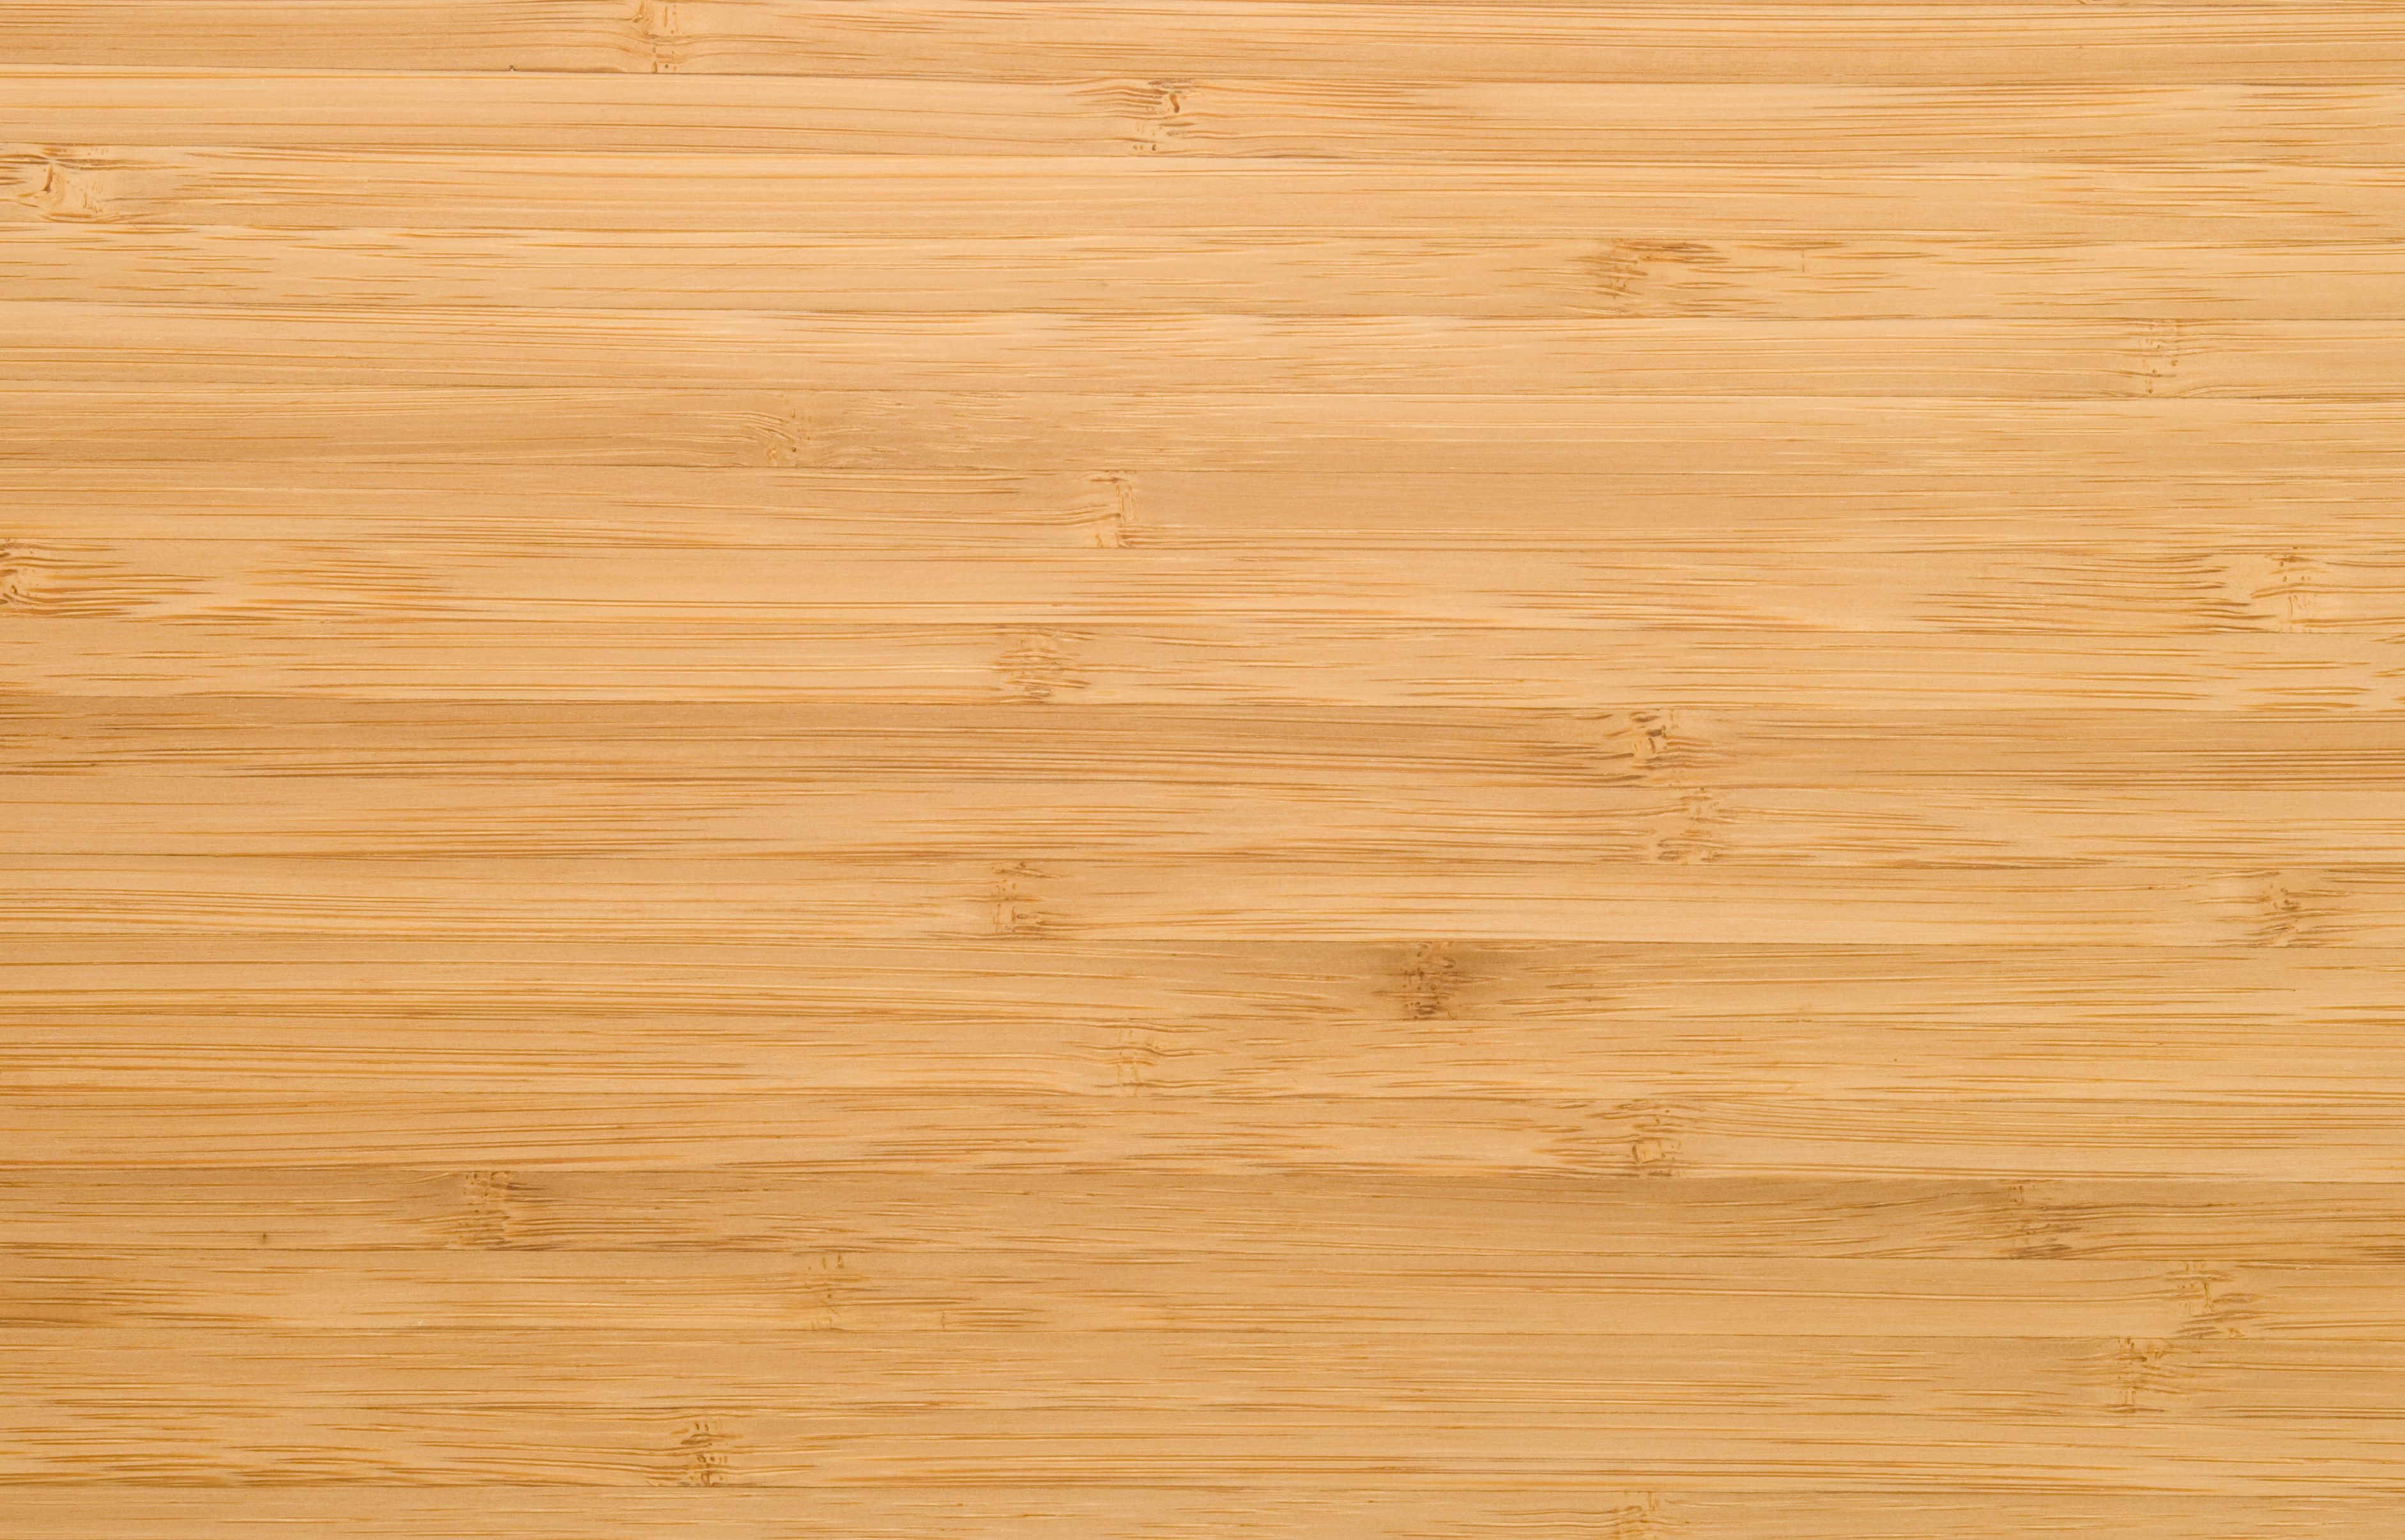 best hardwood floor finish for high traffic of can you use a wet mop on bamboo floors within natural bamboo plank 94259870 59aeefd4519de20010d5c648